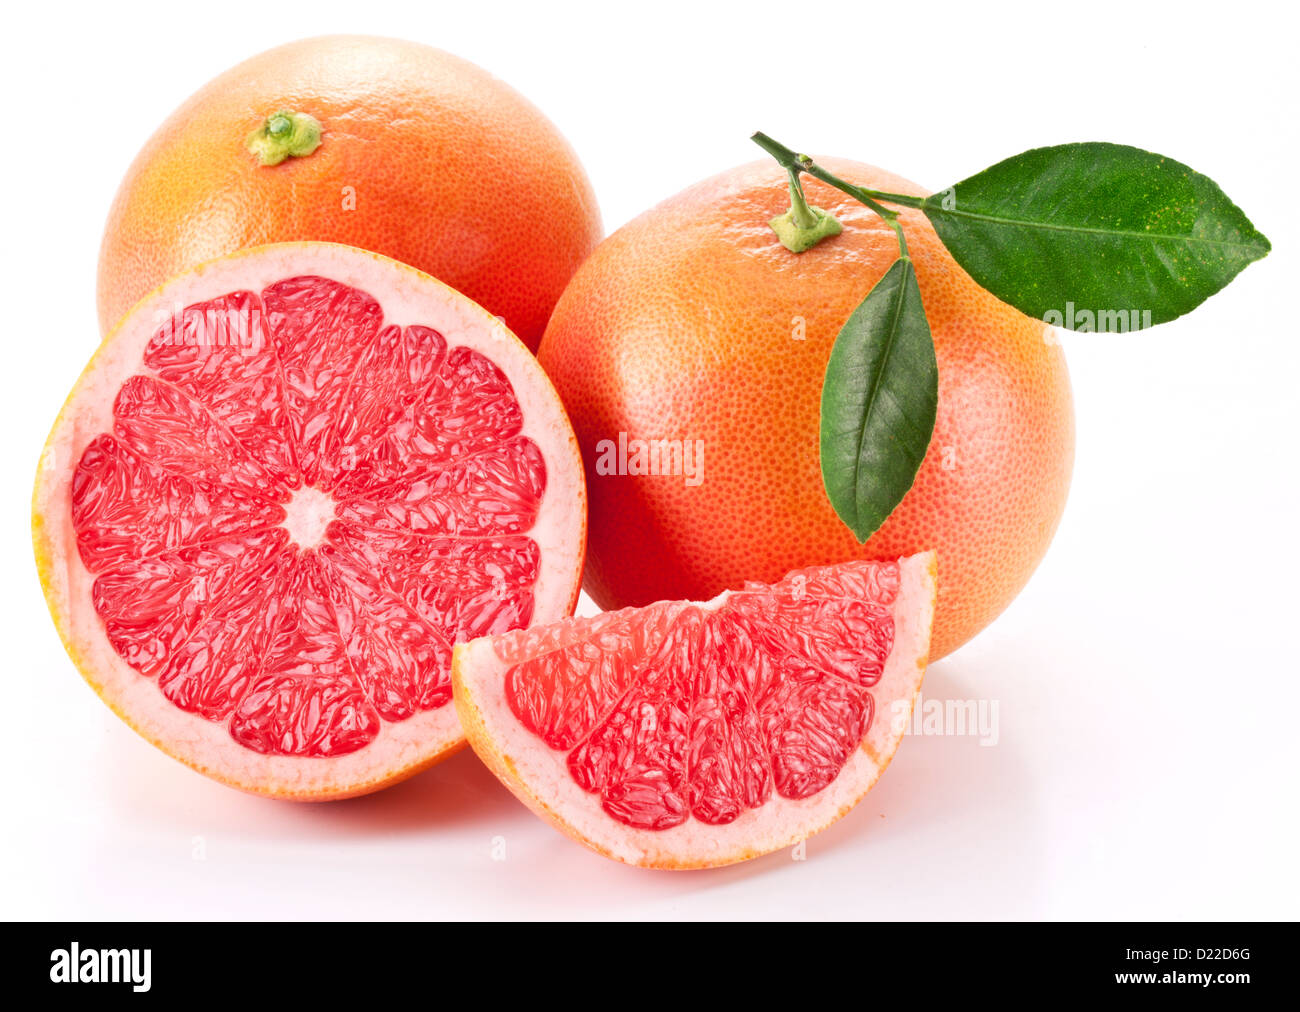 Grapefruit with slices on a white background. Stock Photo